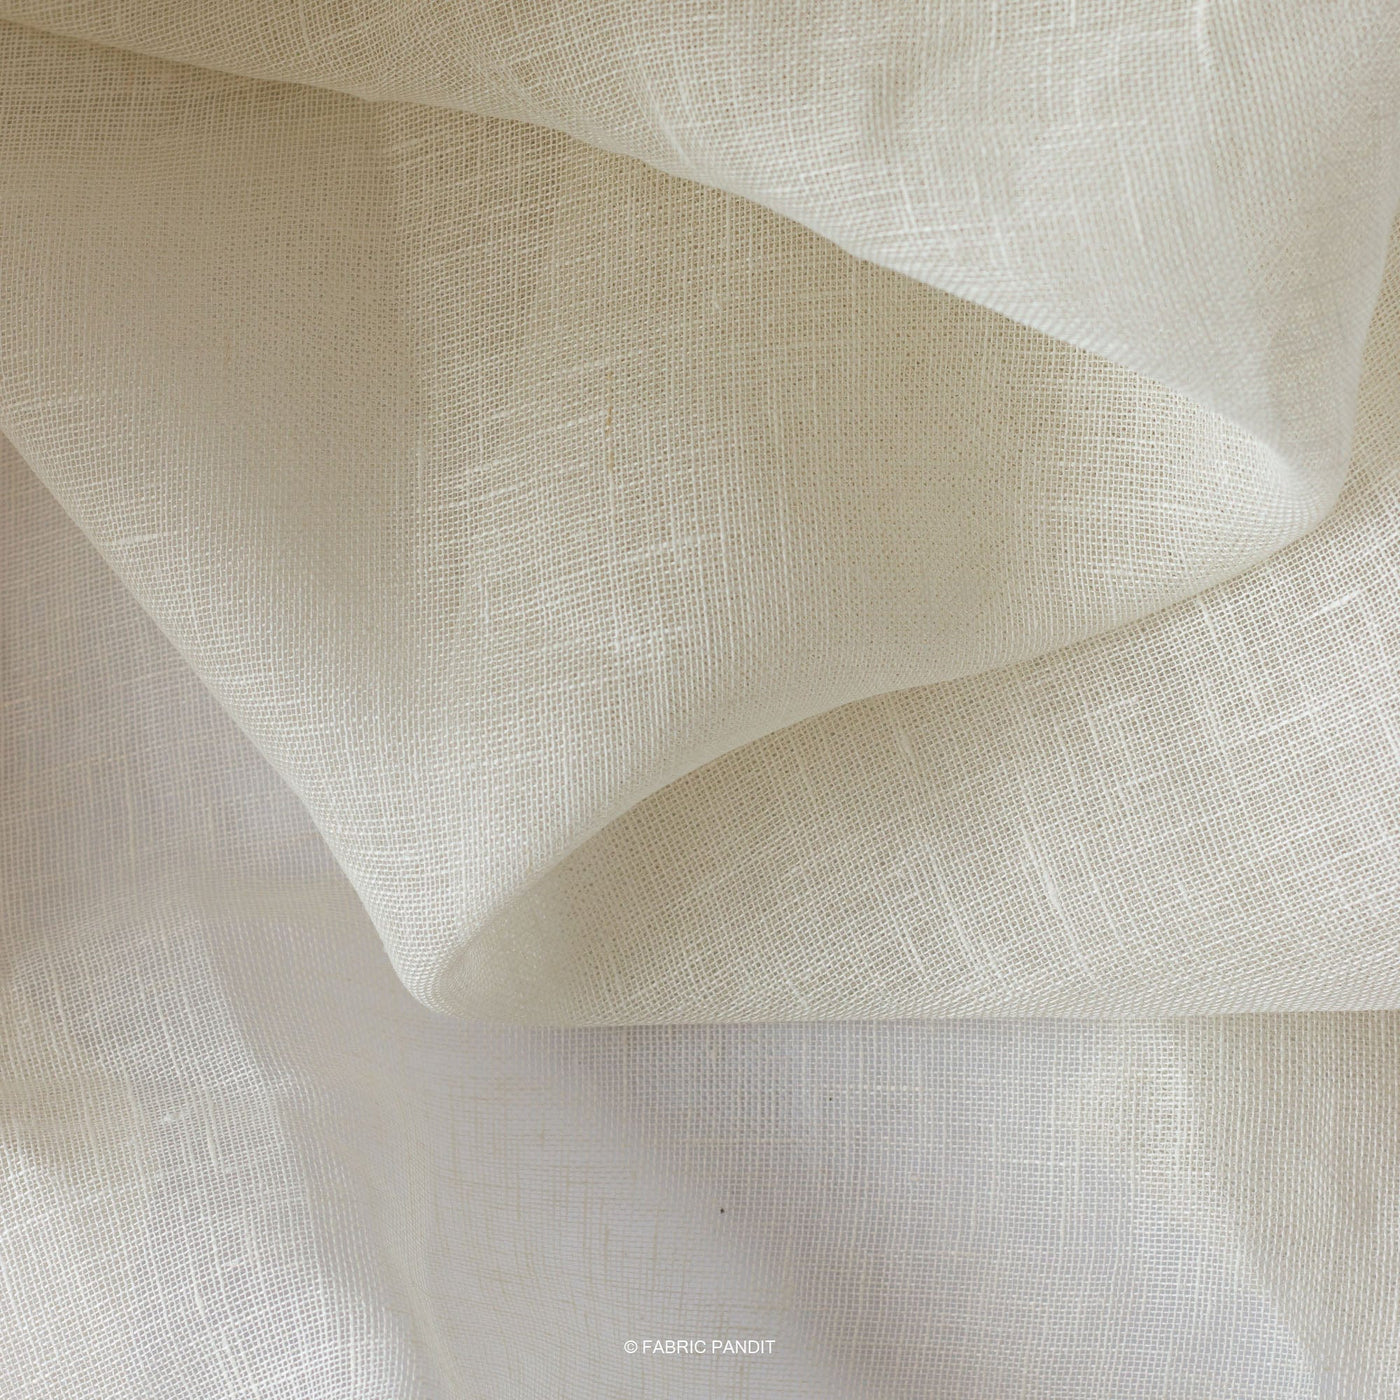 Fabric Pandit Fabric Off-White Dyeable Pure Linen Gauge Plain Fabric (Width 55 Inches, 134 Gms)